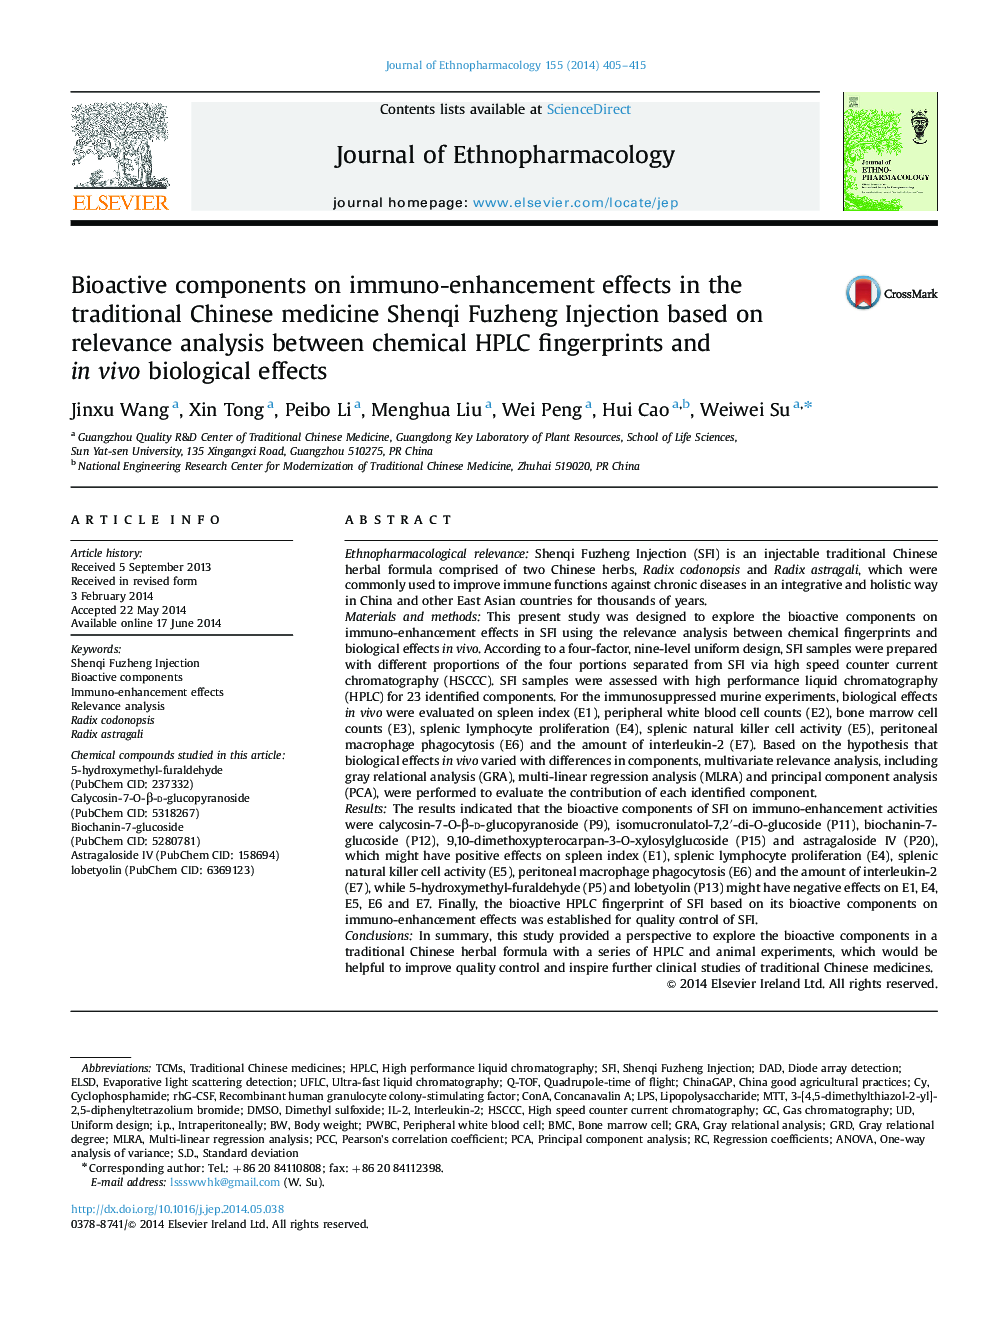 Bioactive components on immuno-enhancement effects in the traditional Chinese medicine Shenqi Fuzheng Injection based on relevance analysis between chemical HPLC fingerprints and in vivo biological effects